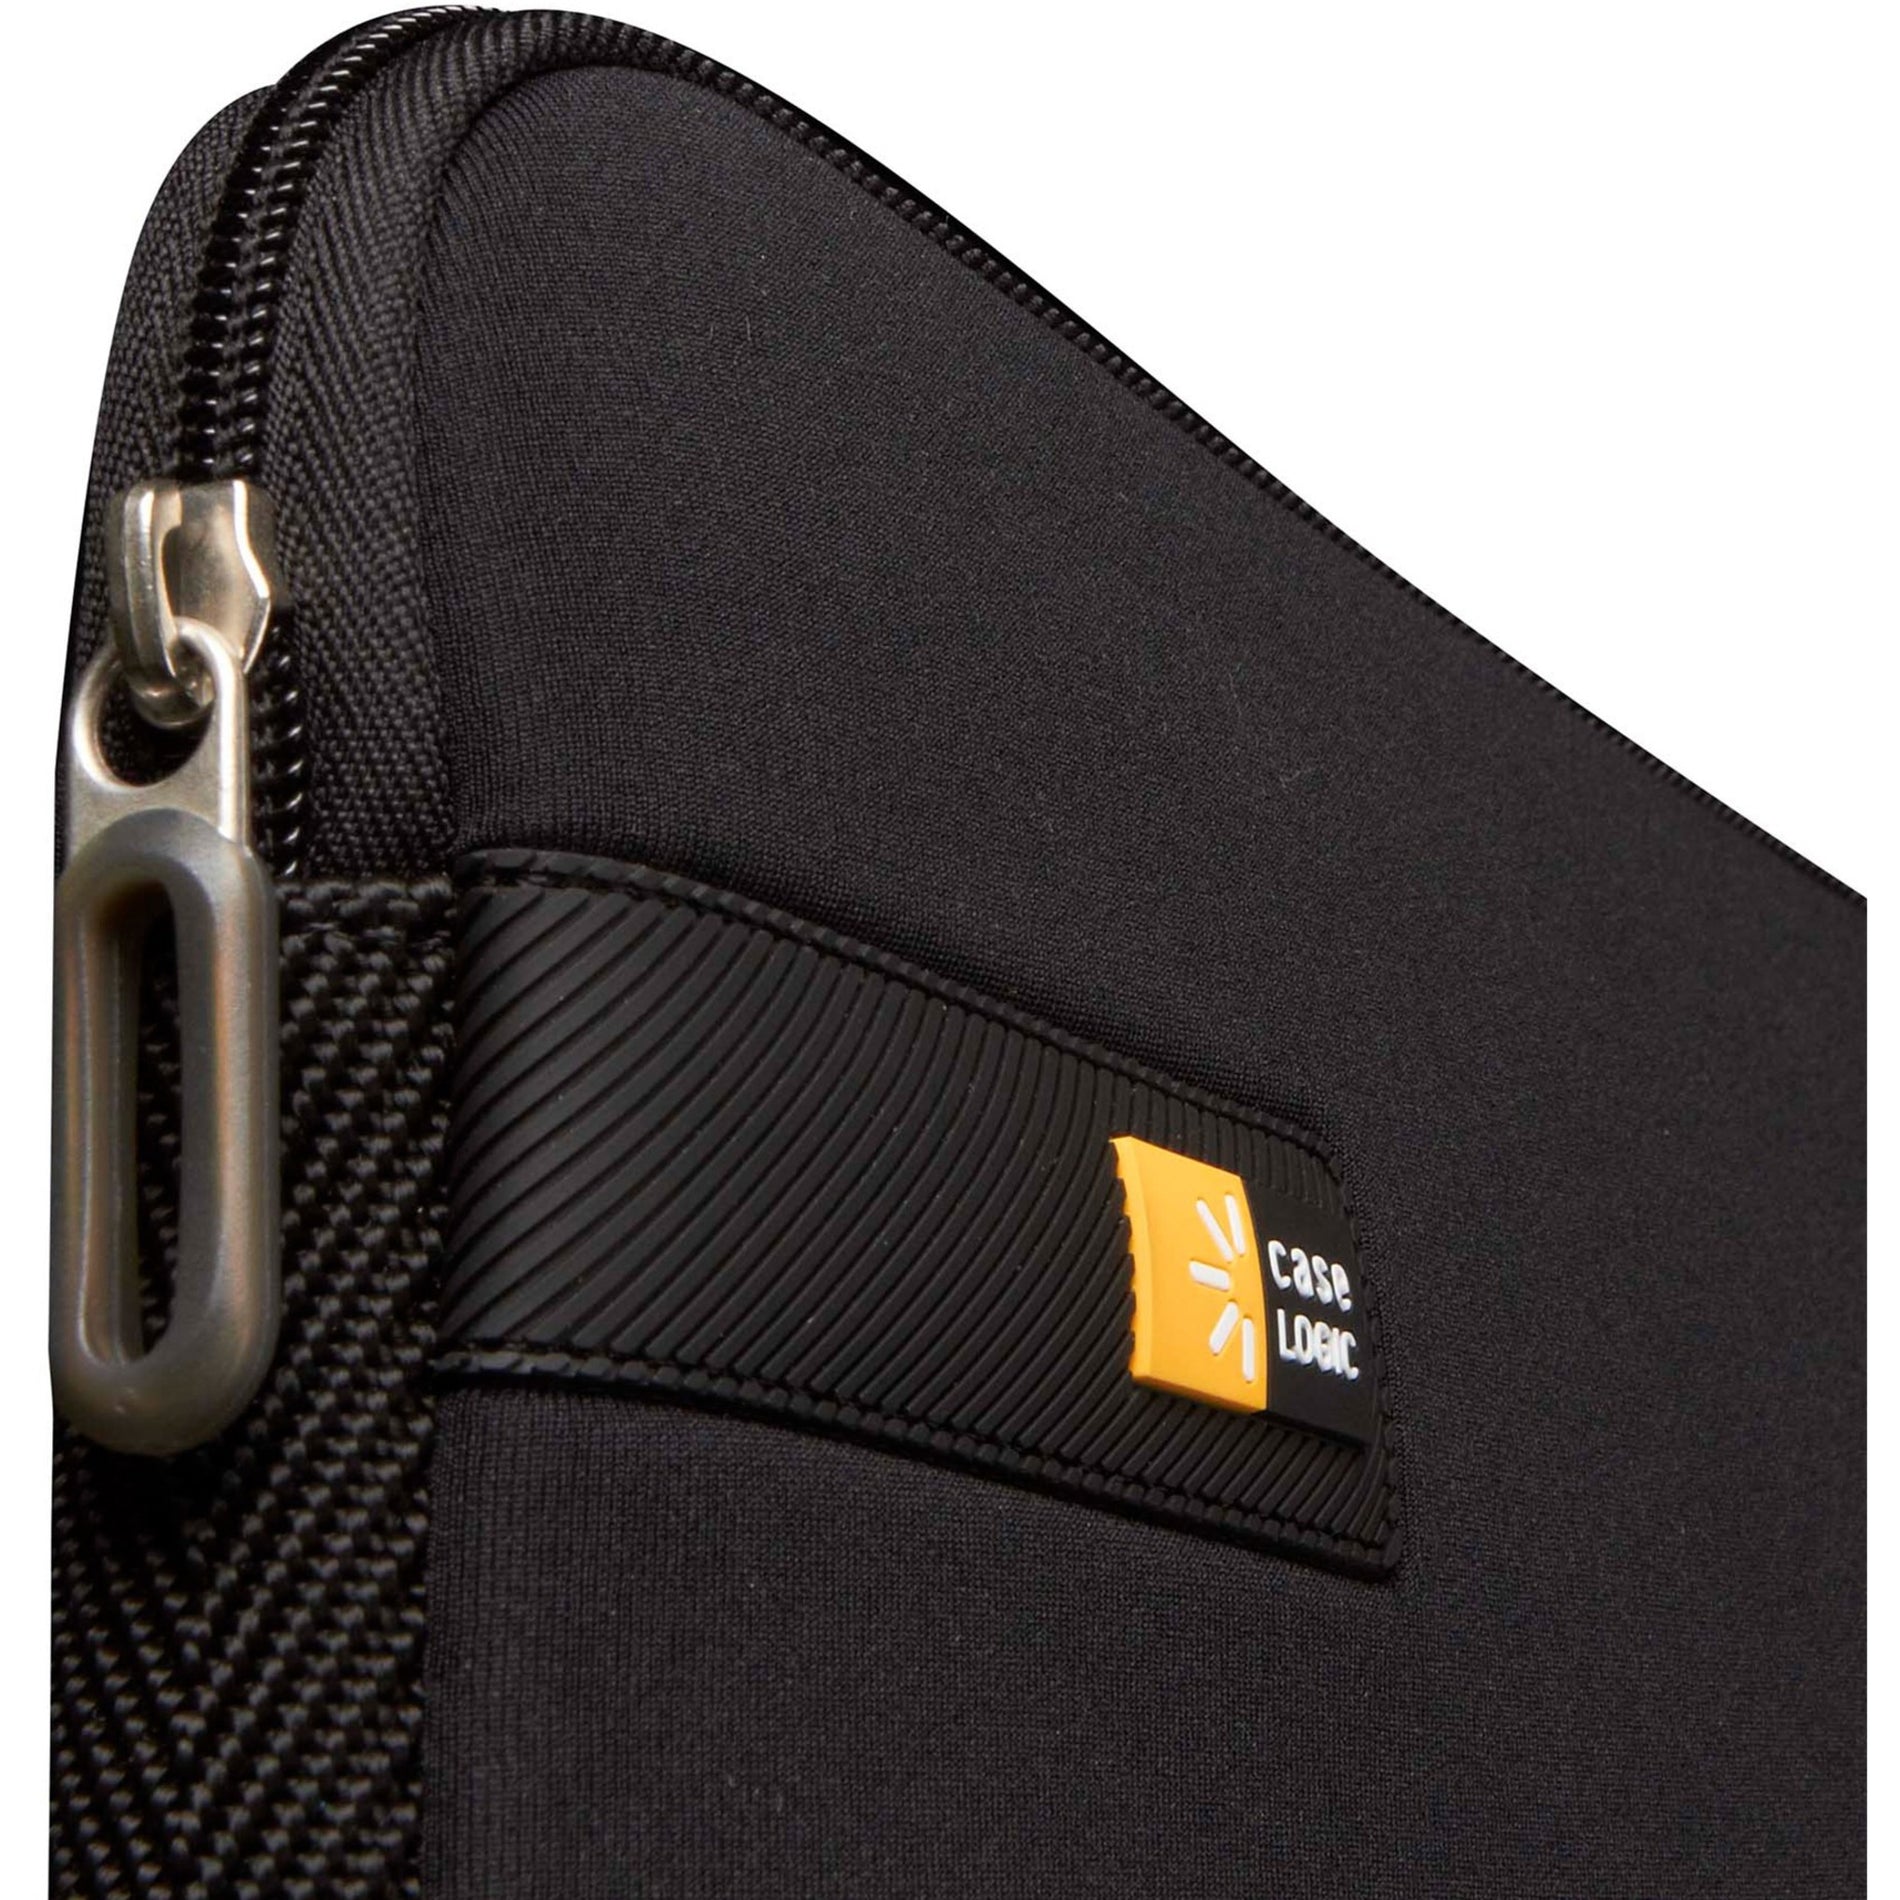 Case Logic 3201354 14" Laptop Sleeve, Sleek and Protective Black Carrying Case [Discontinued]